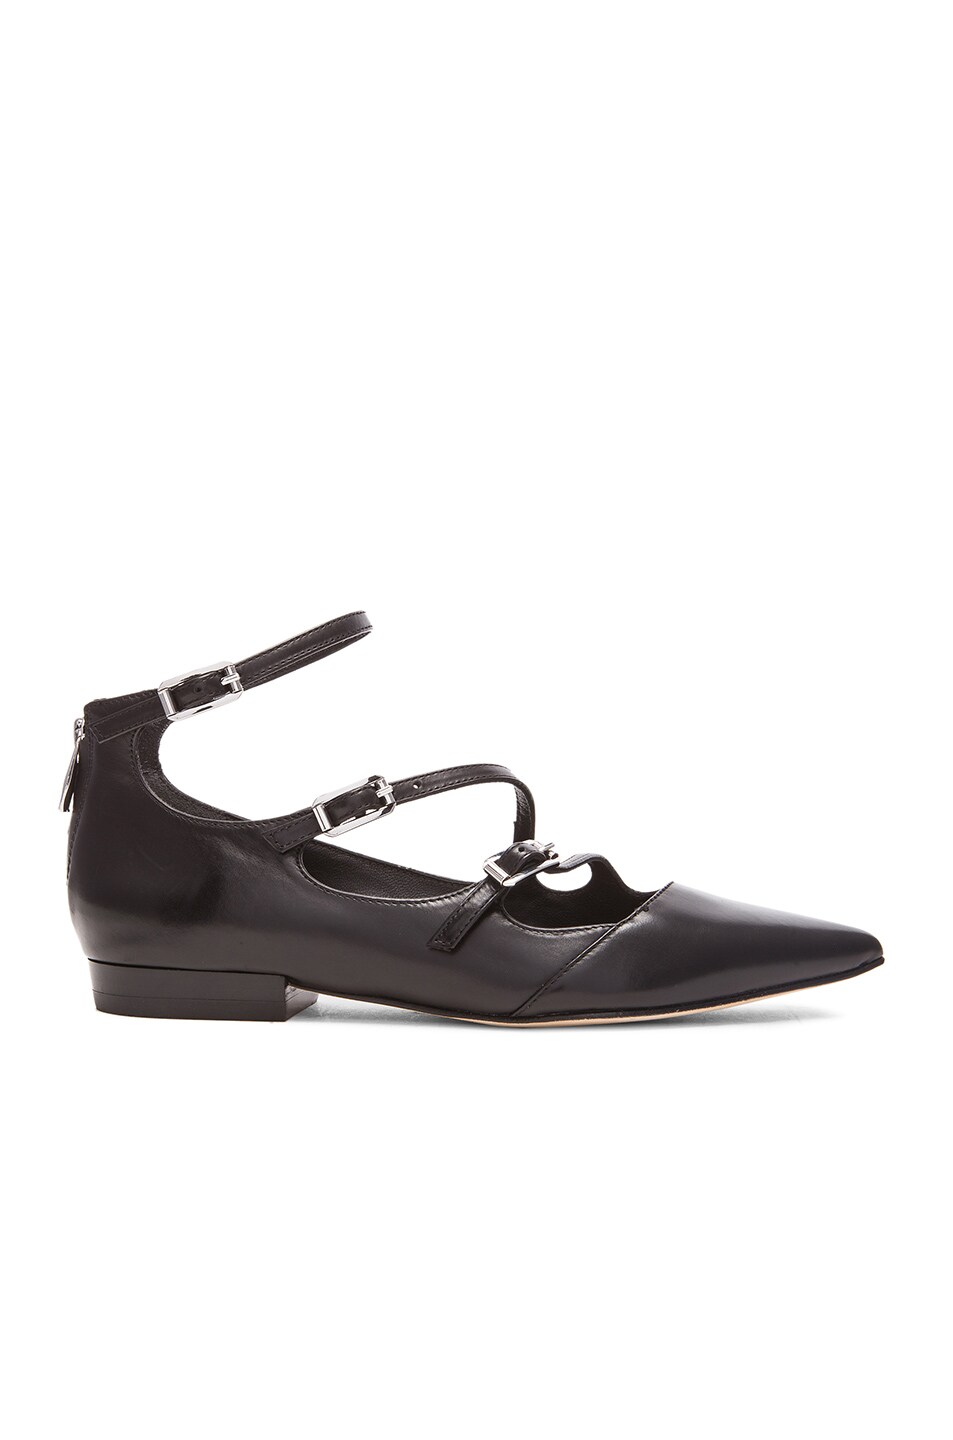 Image 1 of Sigerson Morrison Pulie Leather Flats in Black